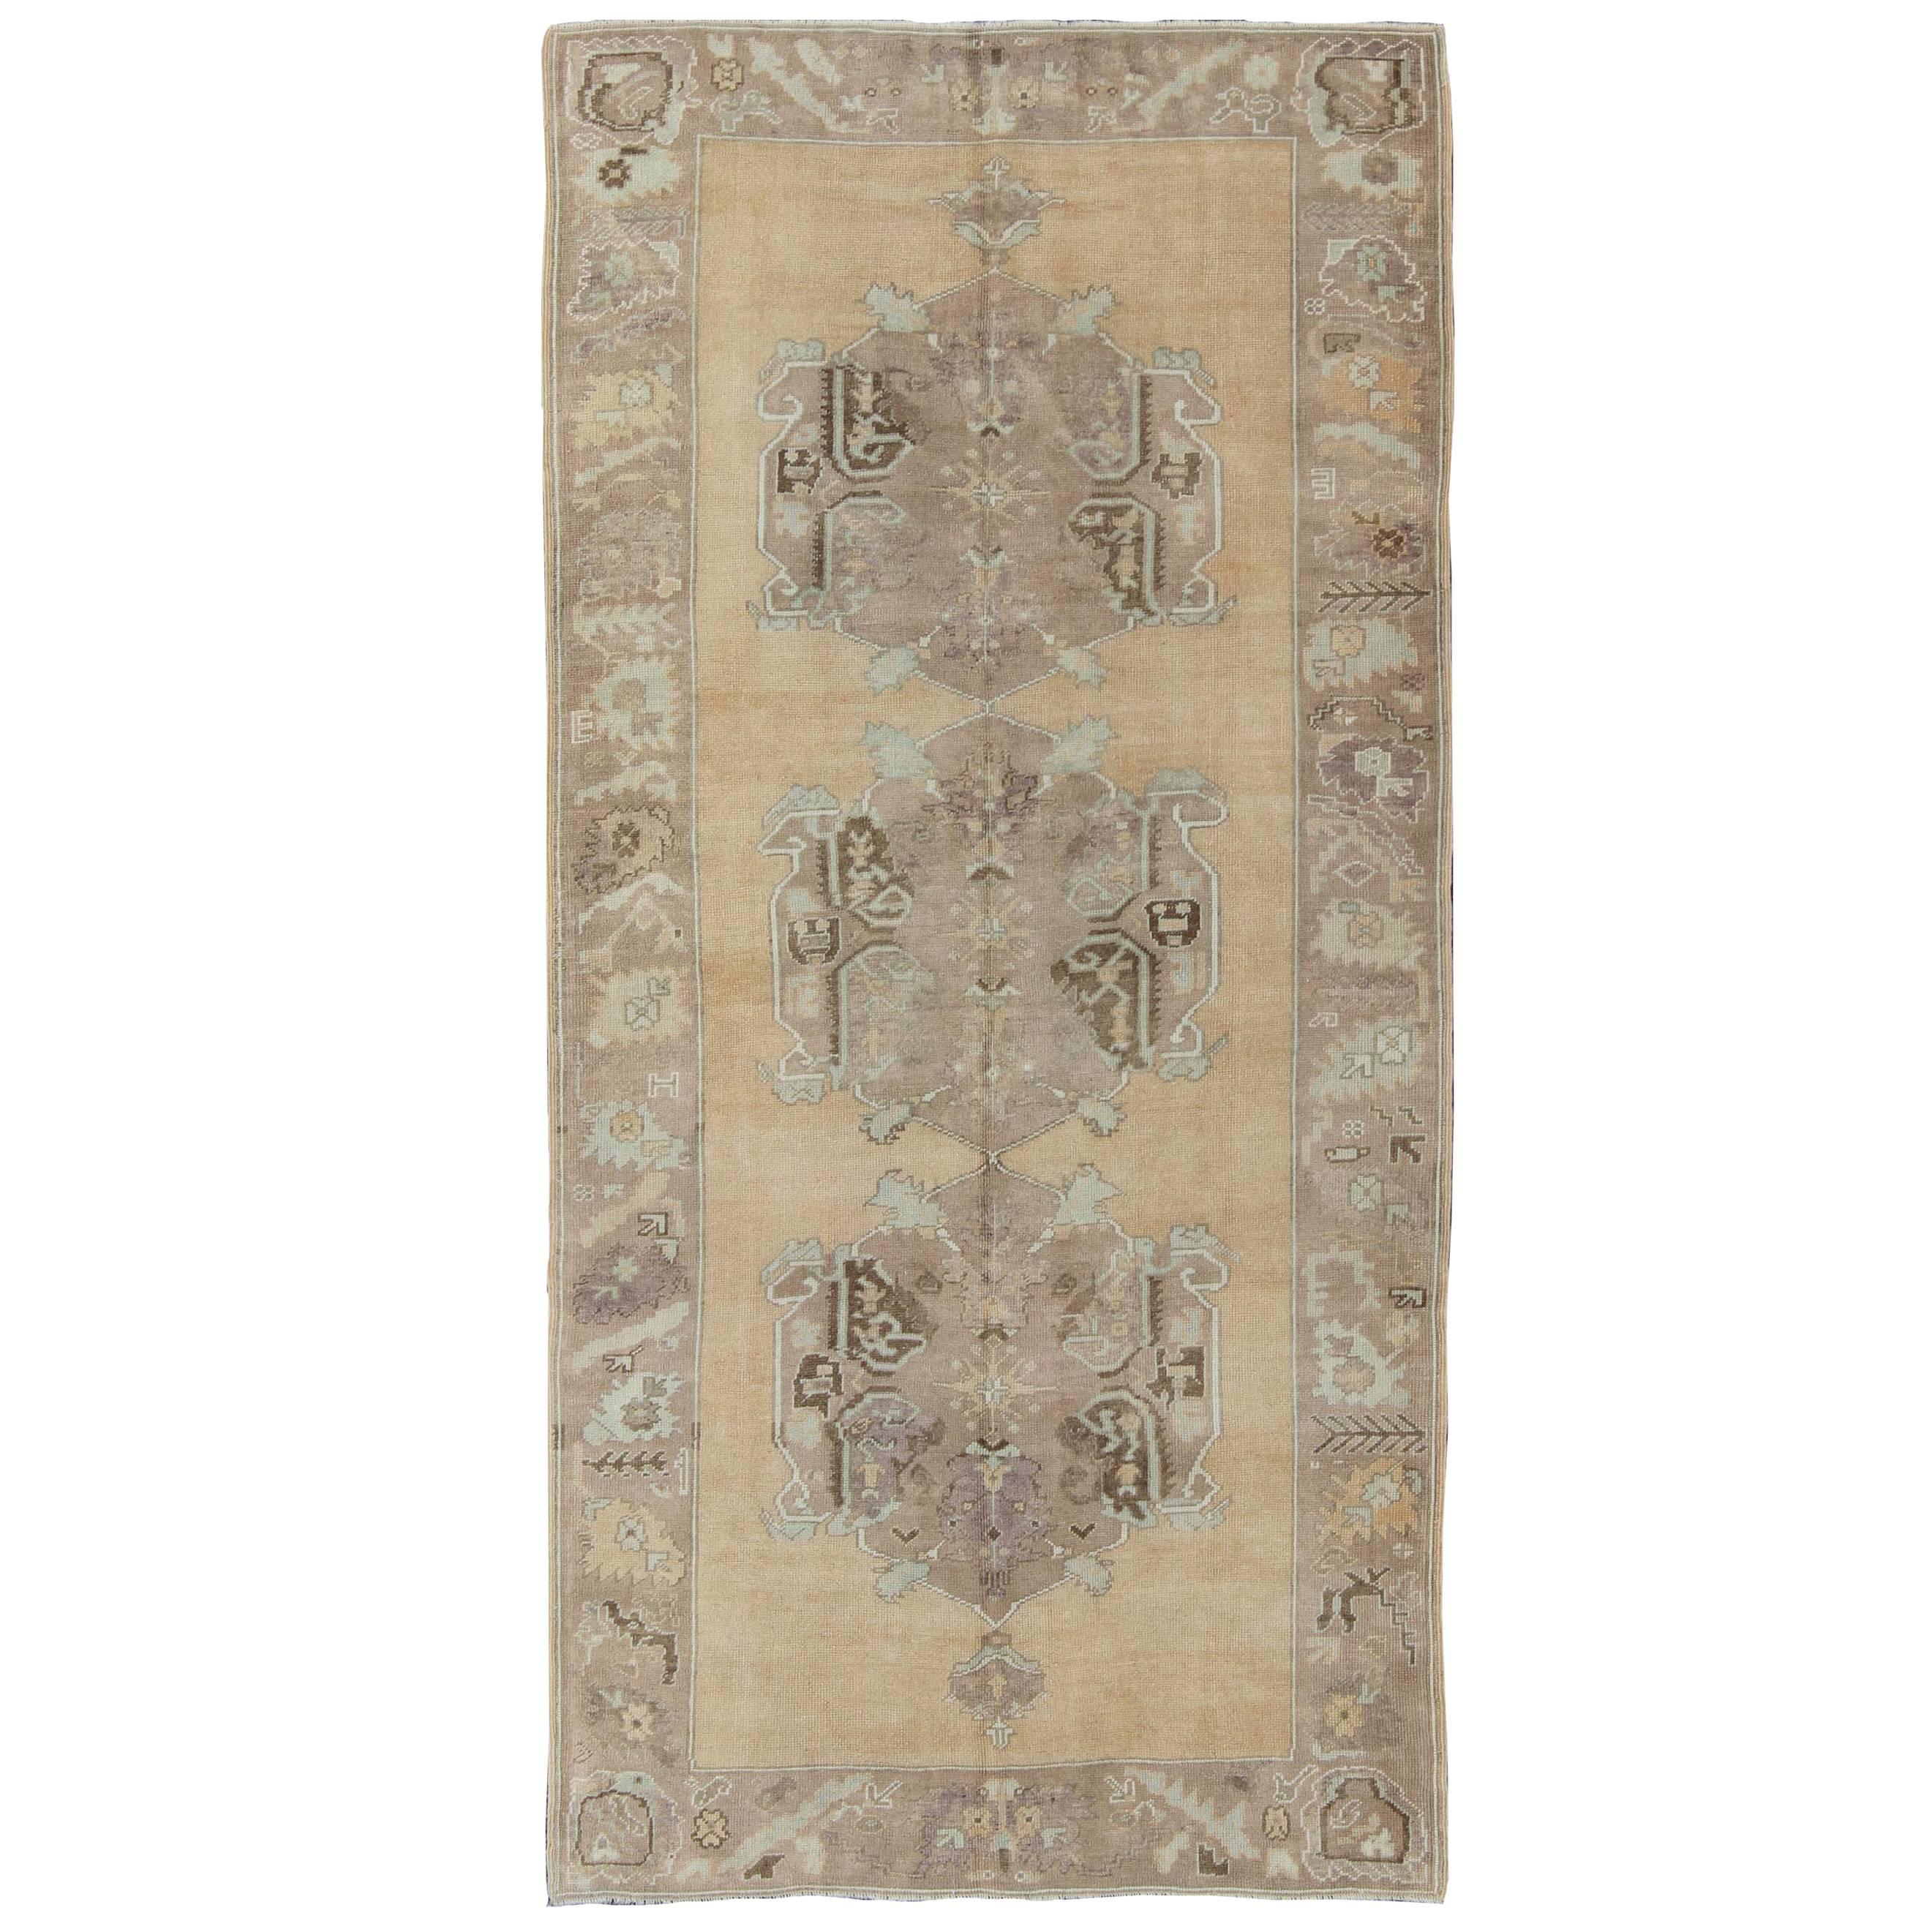 Vintage Oushak Rug with Three Central Medallions Set on Faint Sand-Colored Field